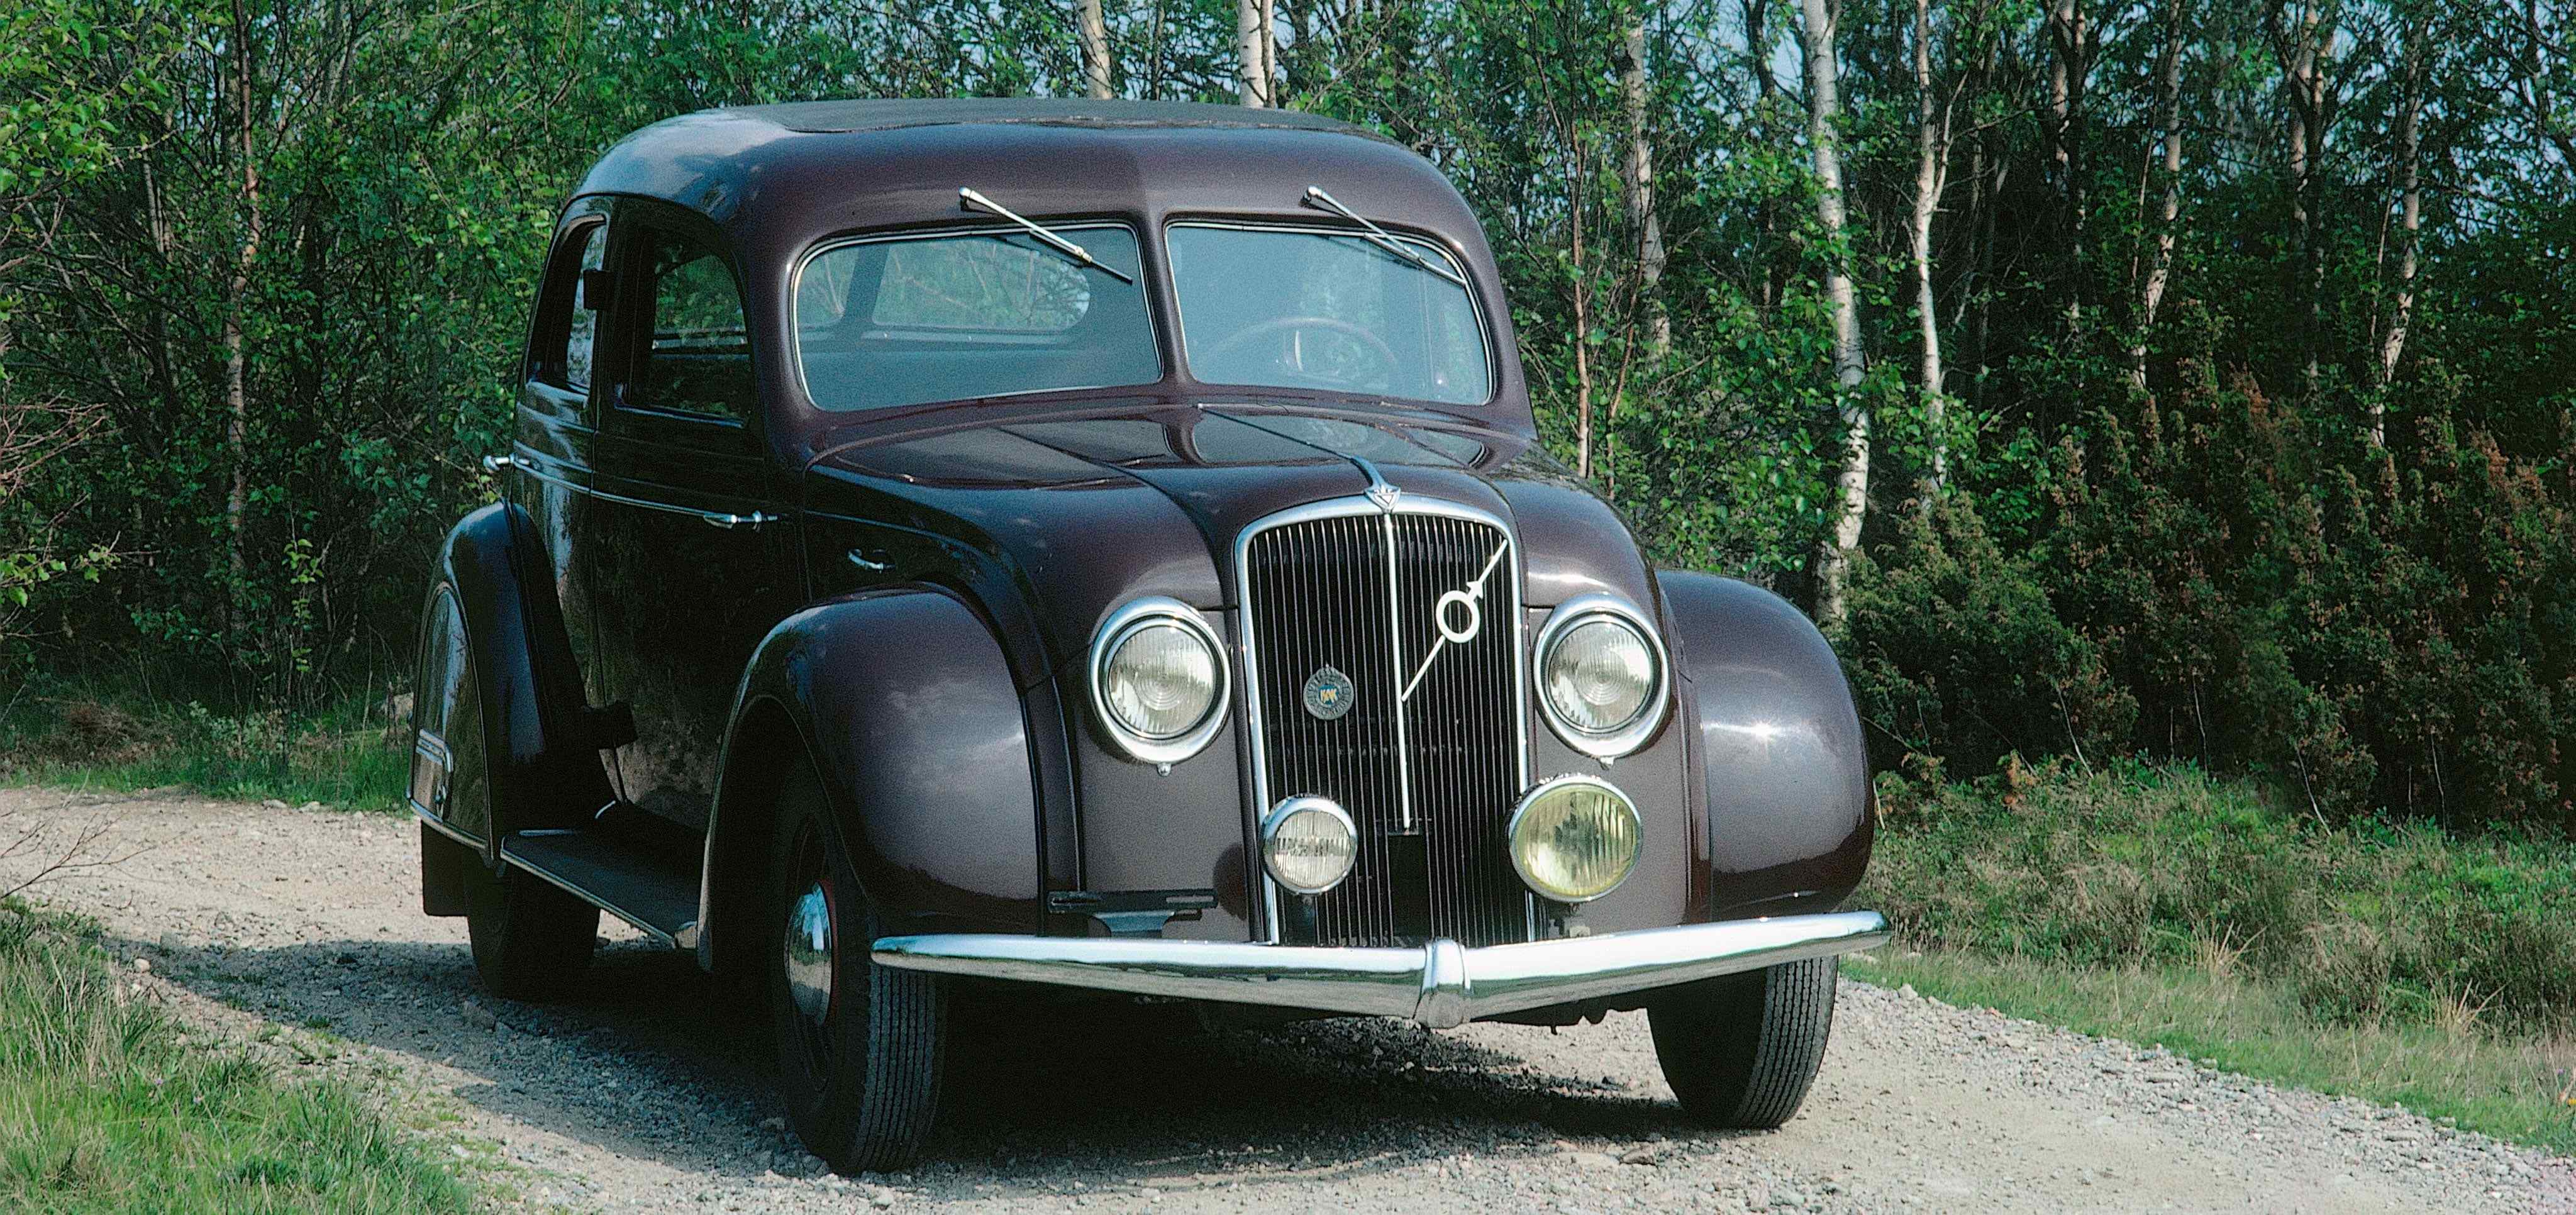 Volvo PV36 Carioca driving on gravel road in forest